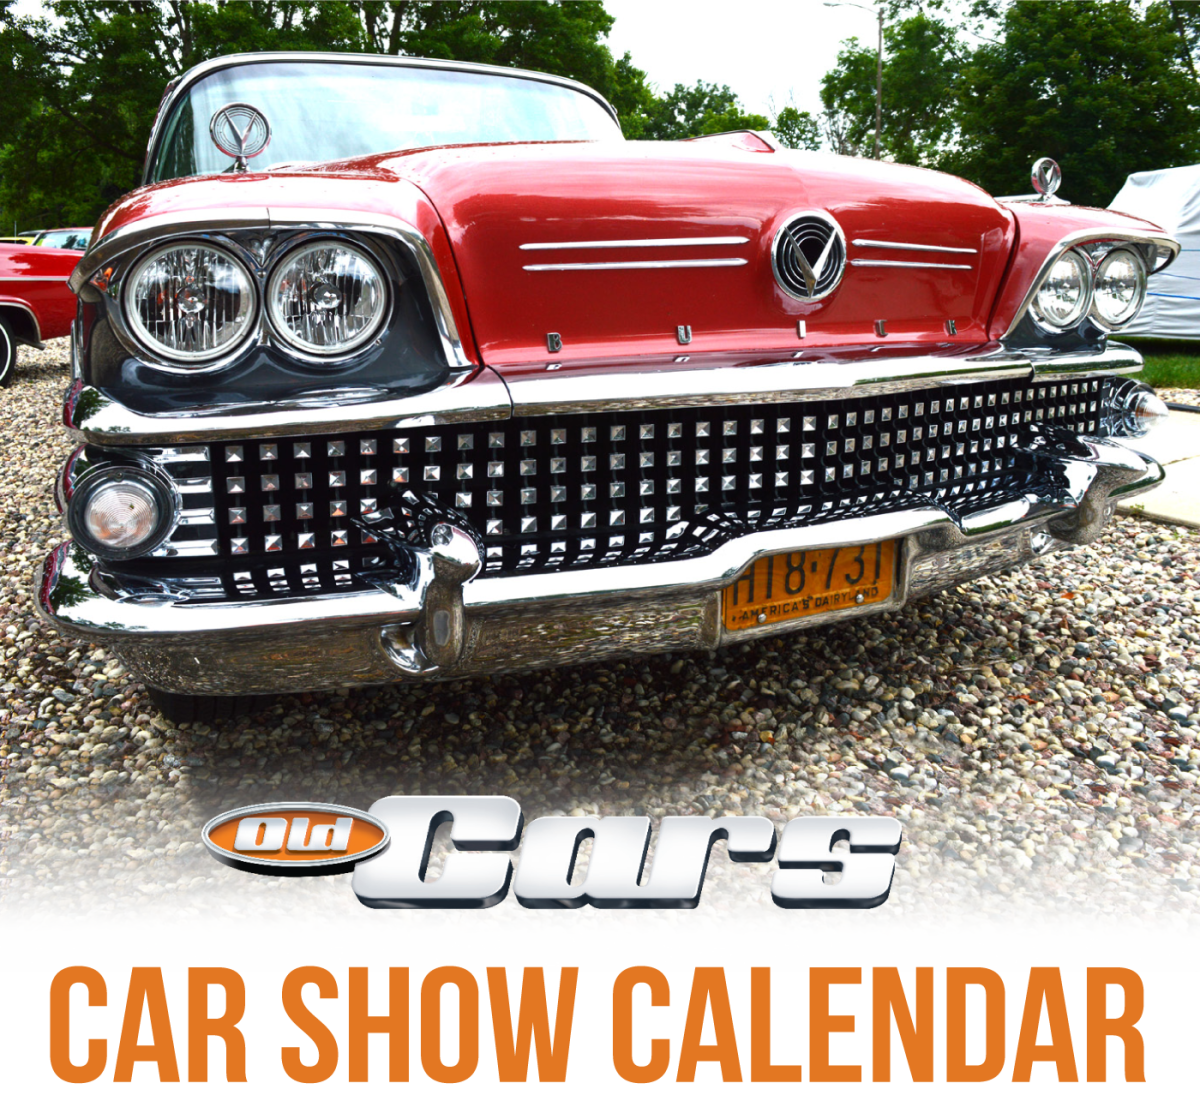 OLD CARS SHOW CALENDAR - Old Cars Weekly